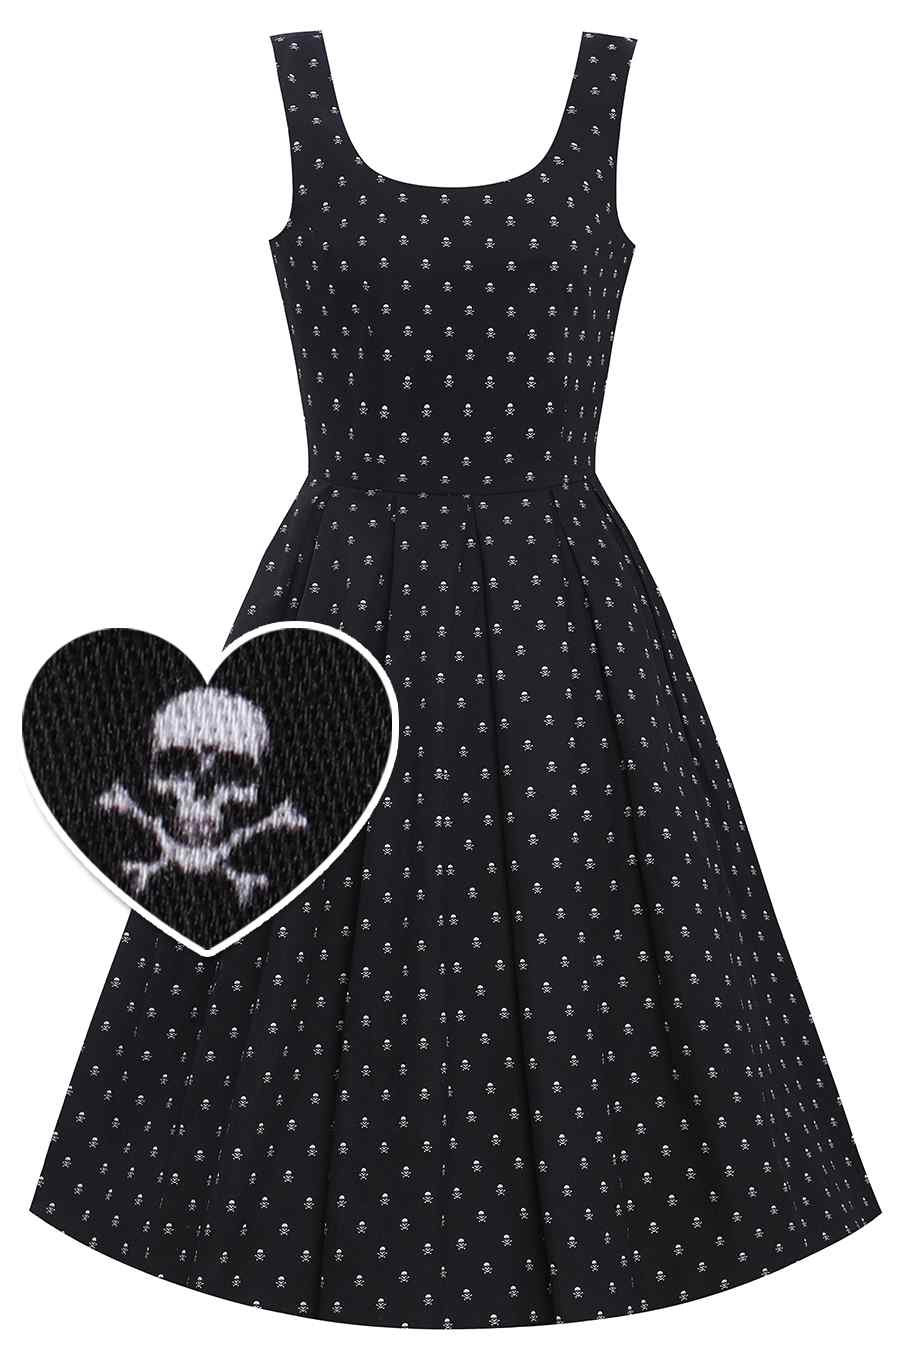 Front view of black skull print vintage style swing dress